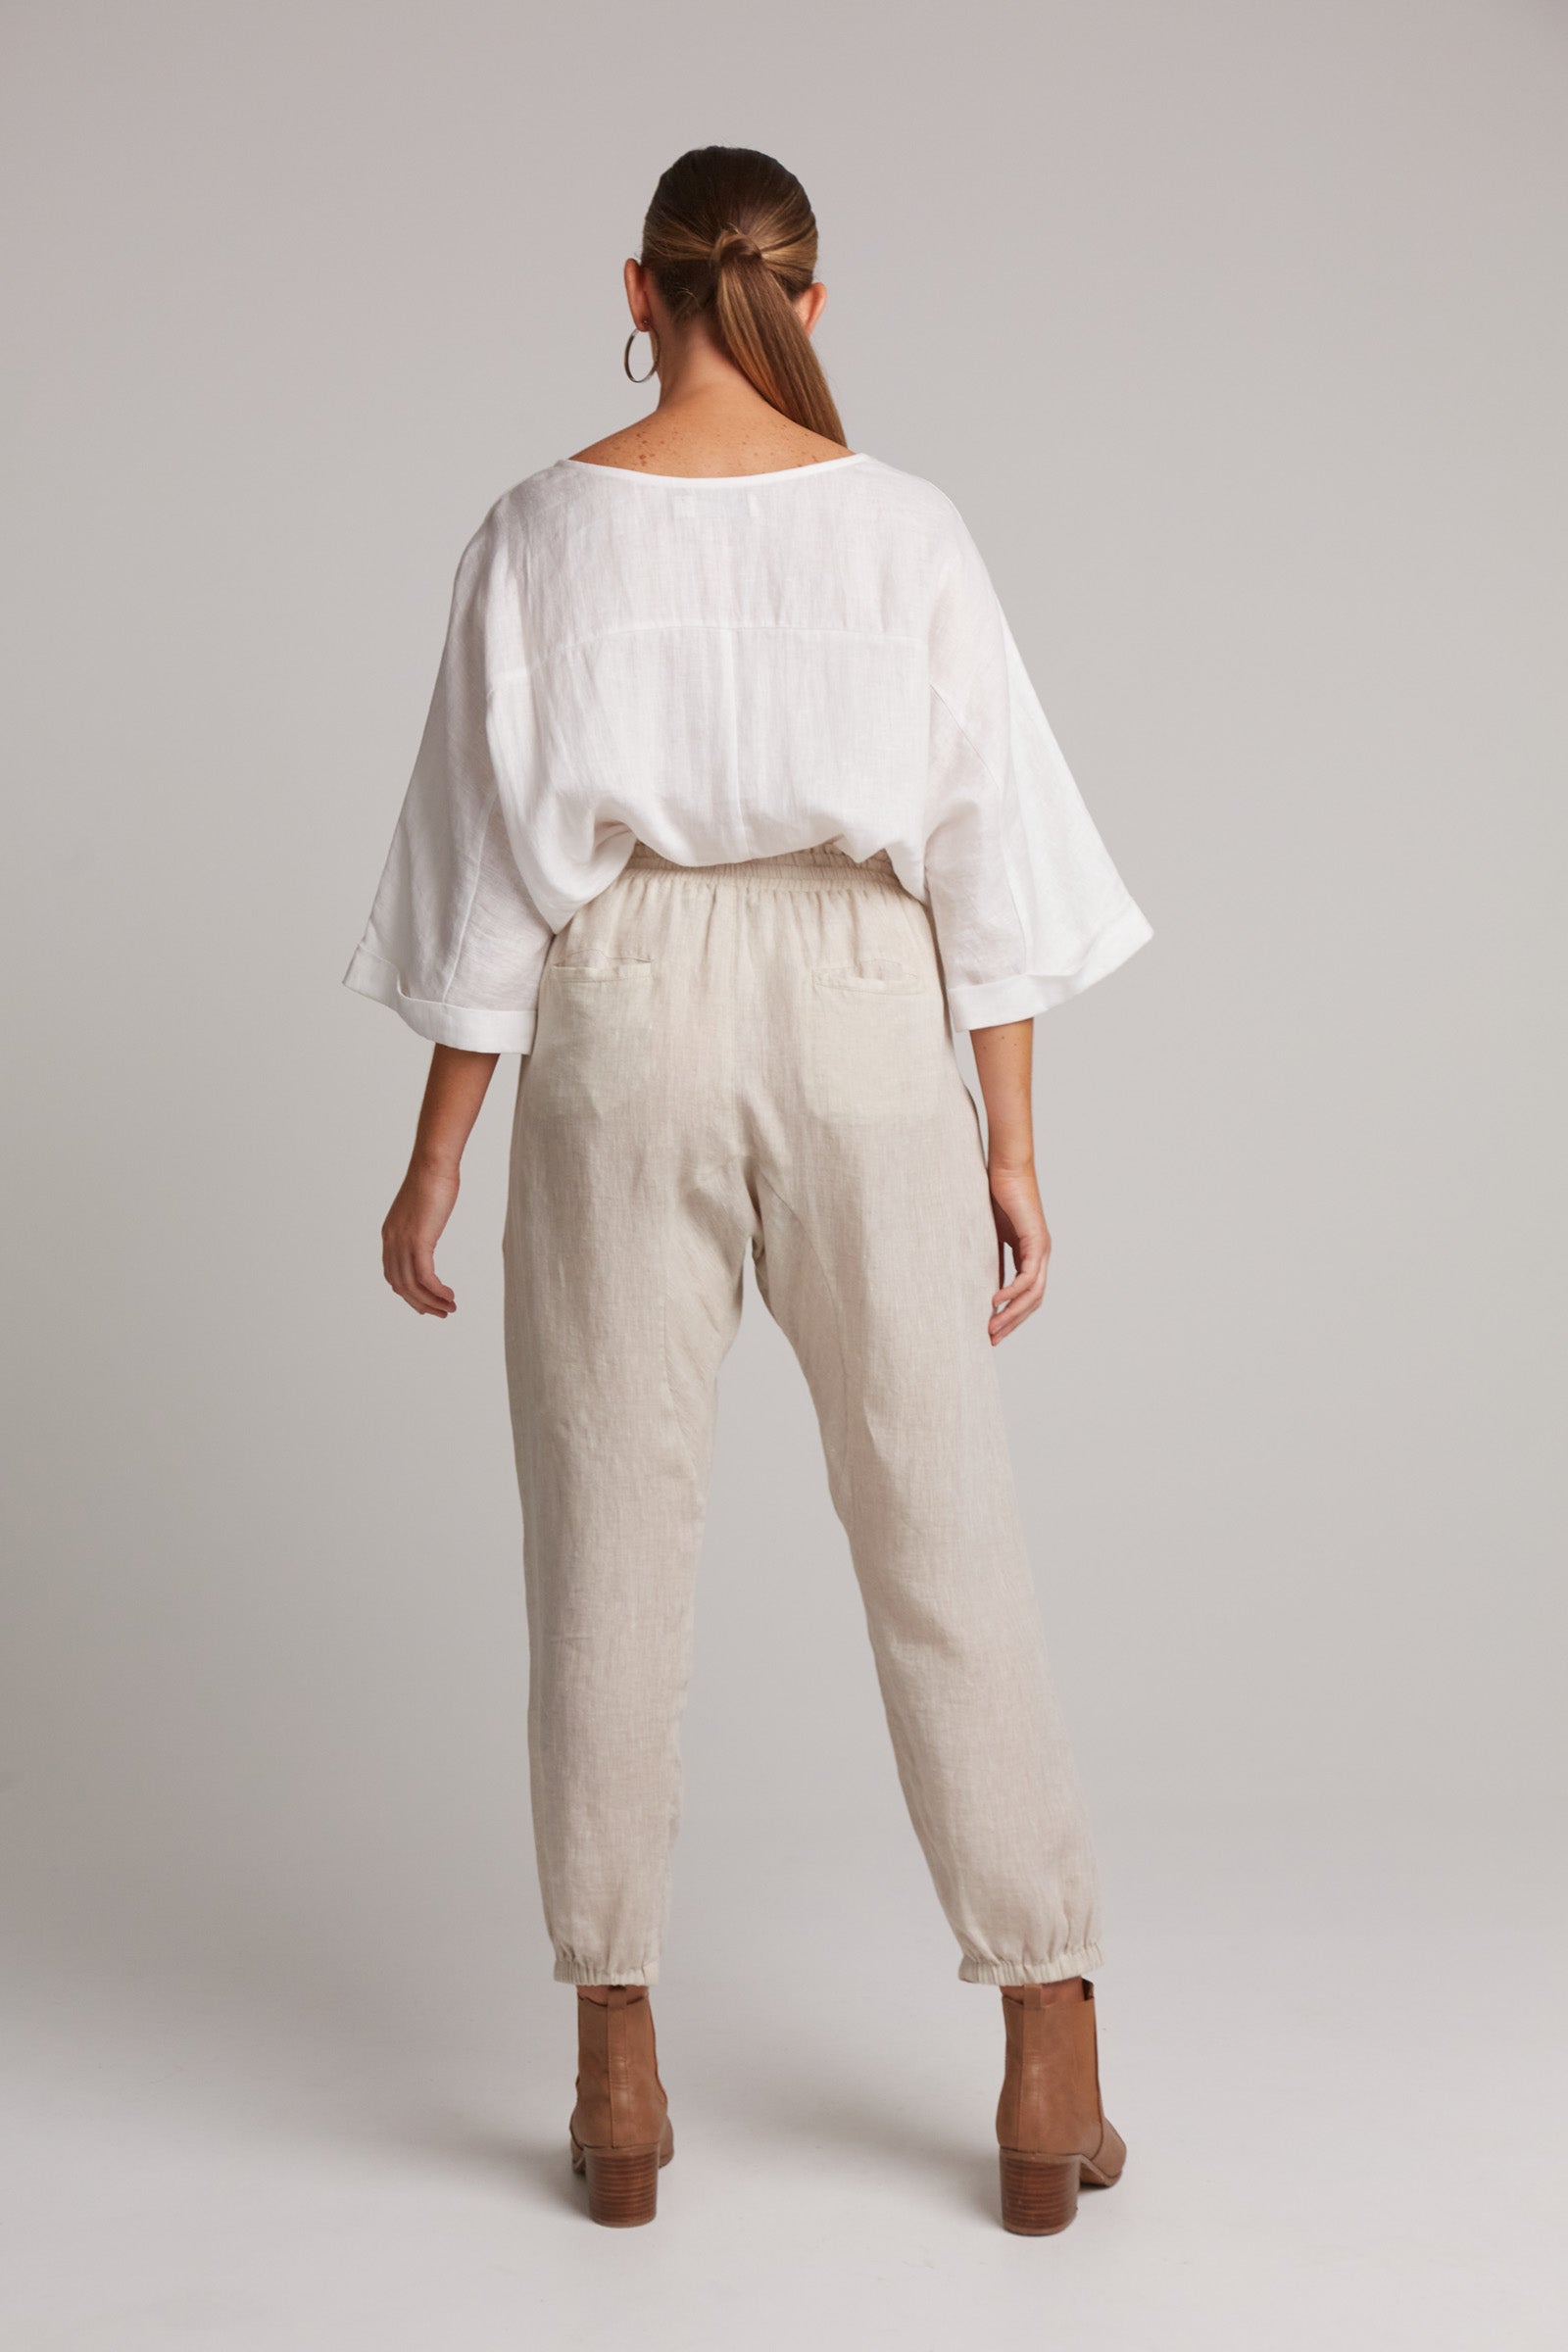 Studio Relaxed Pant - Tusk - eb&ive Clothing - Pant Relaxed Linen